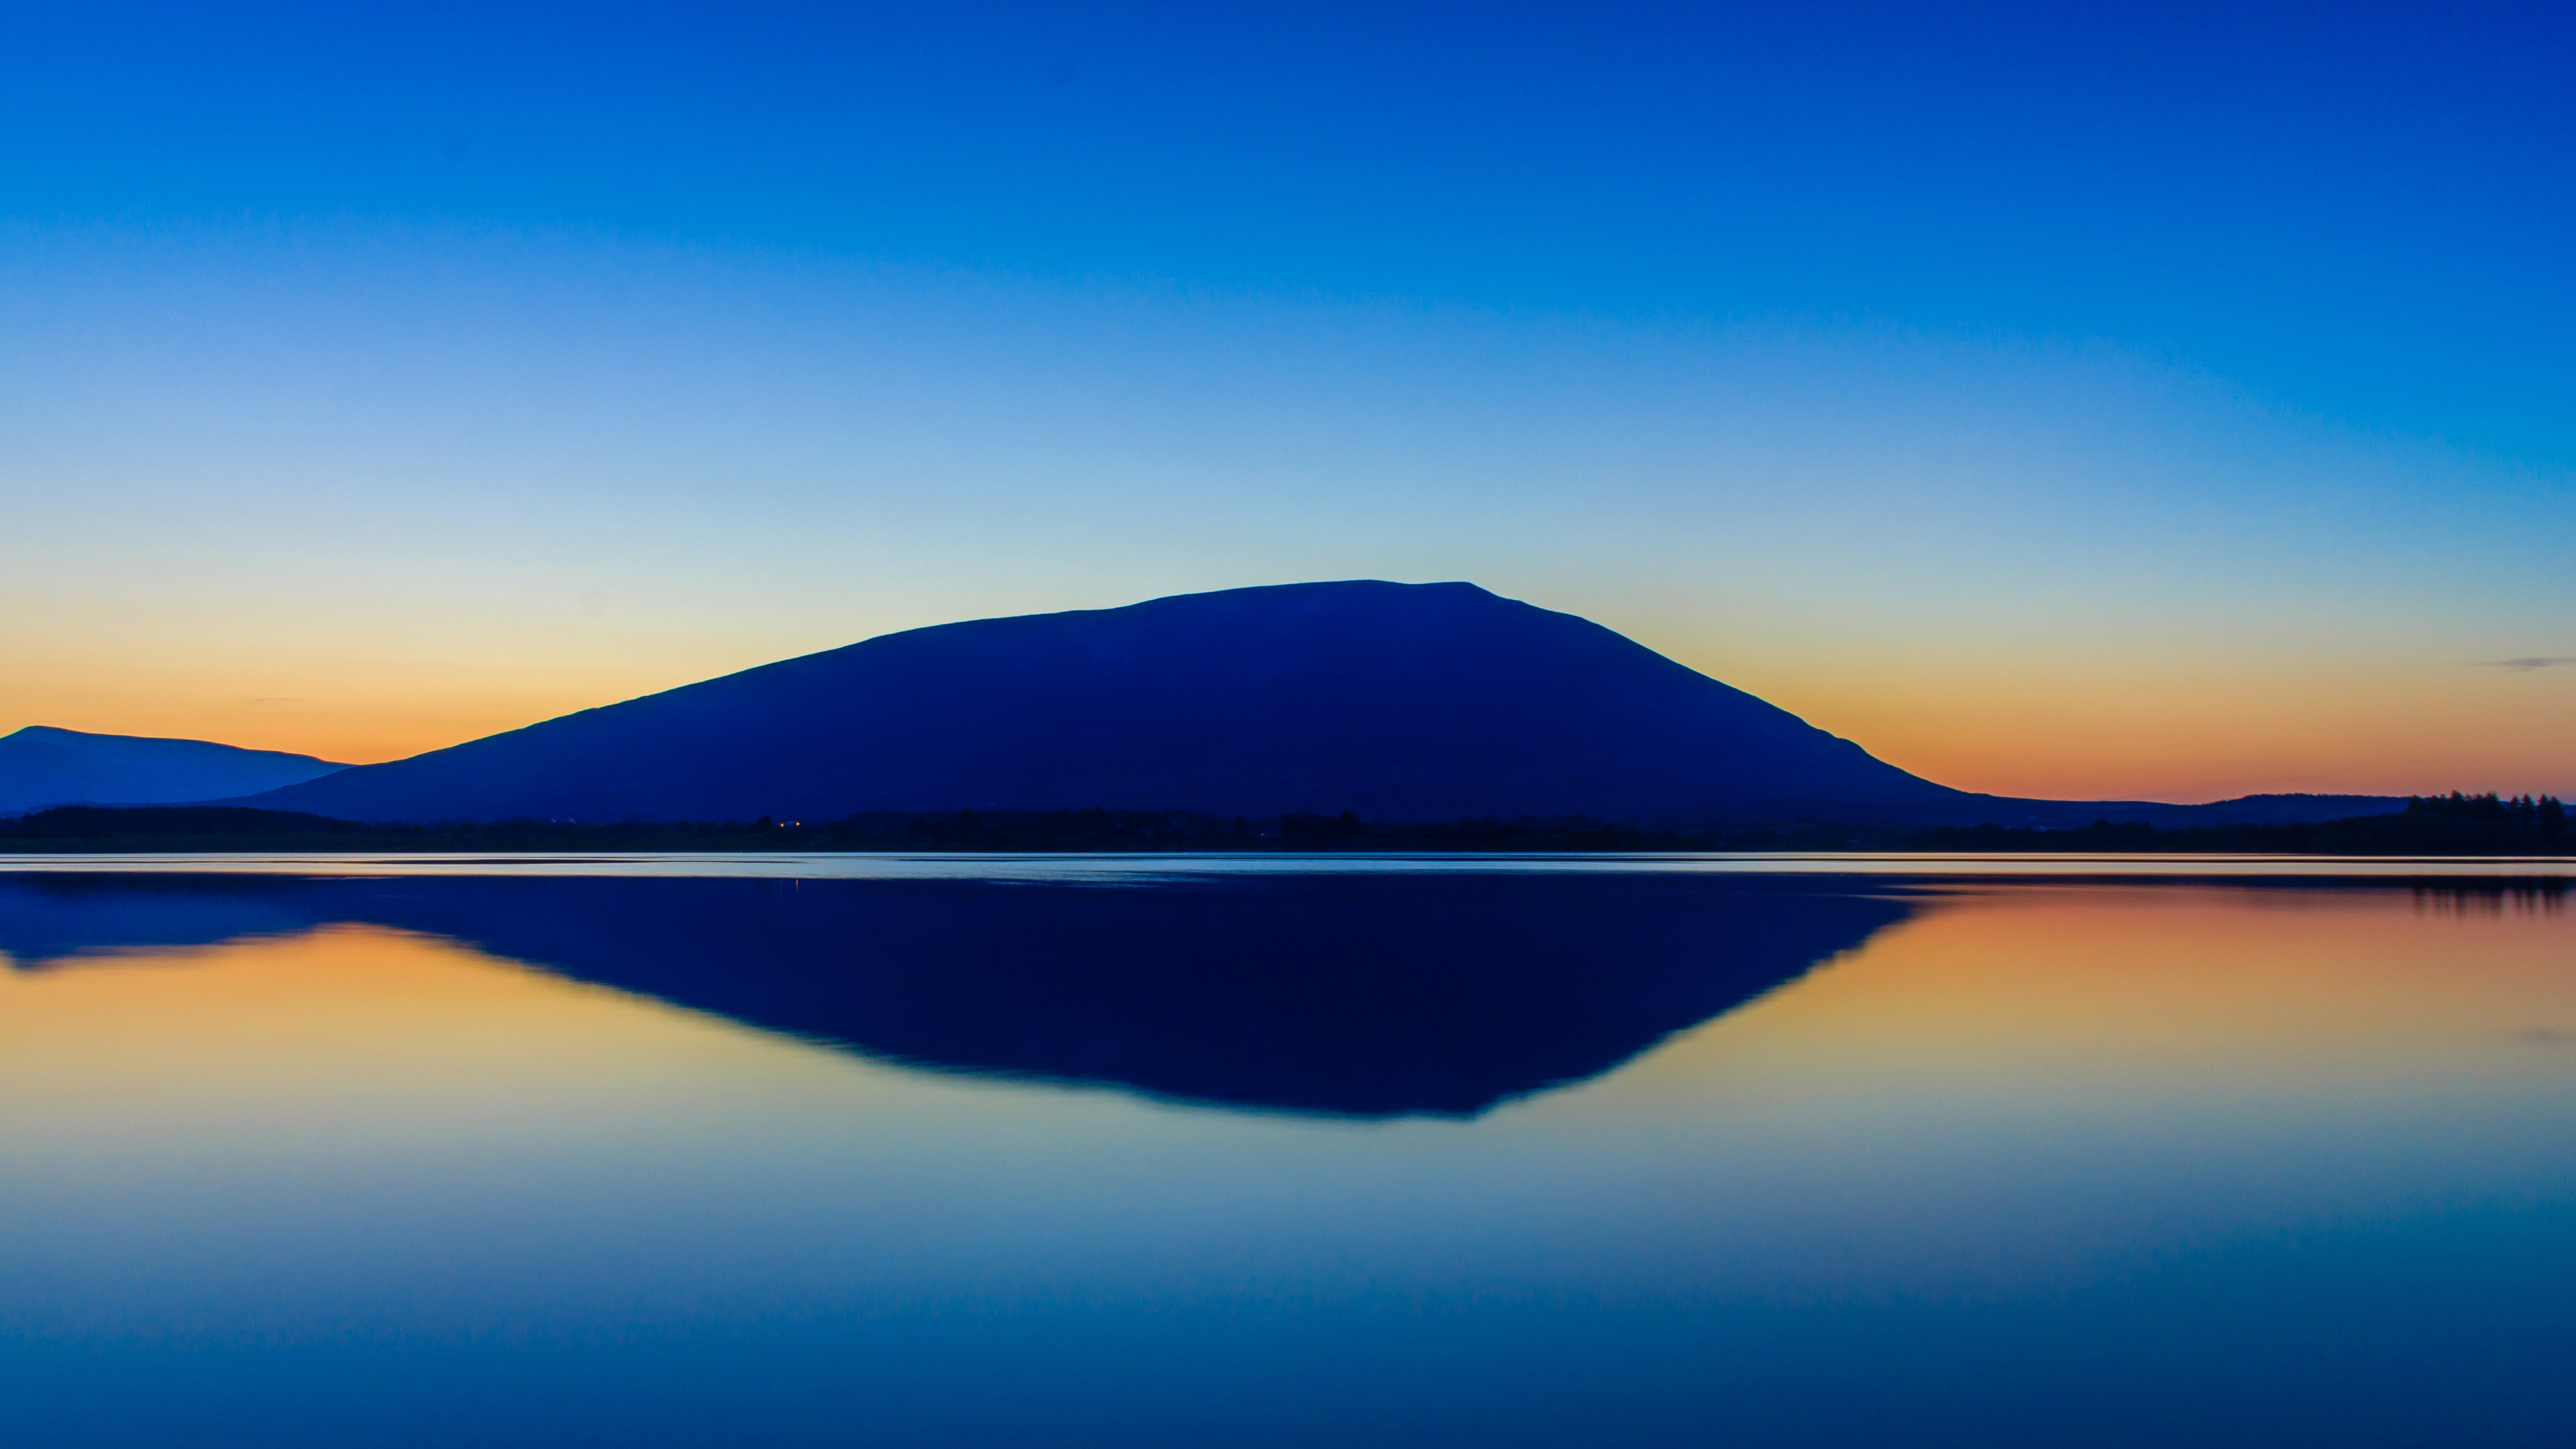 Body of Water Near Mountain Under Blue Sky During Daytime. Wallpaper in 3840x2160 Resolution